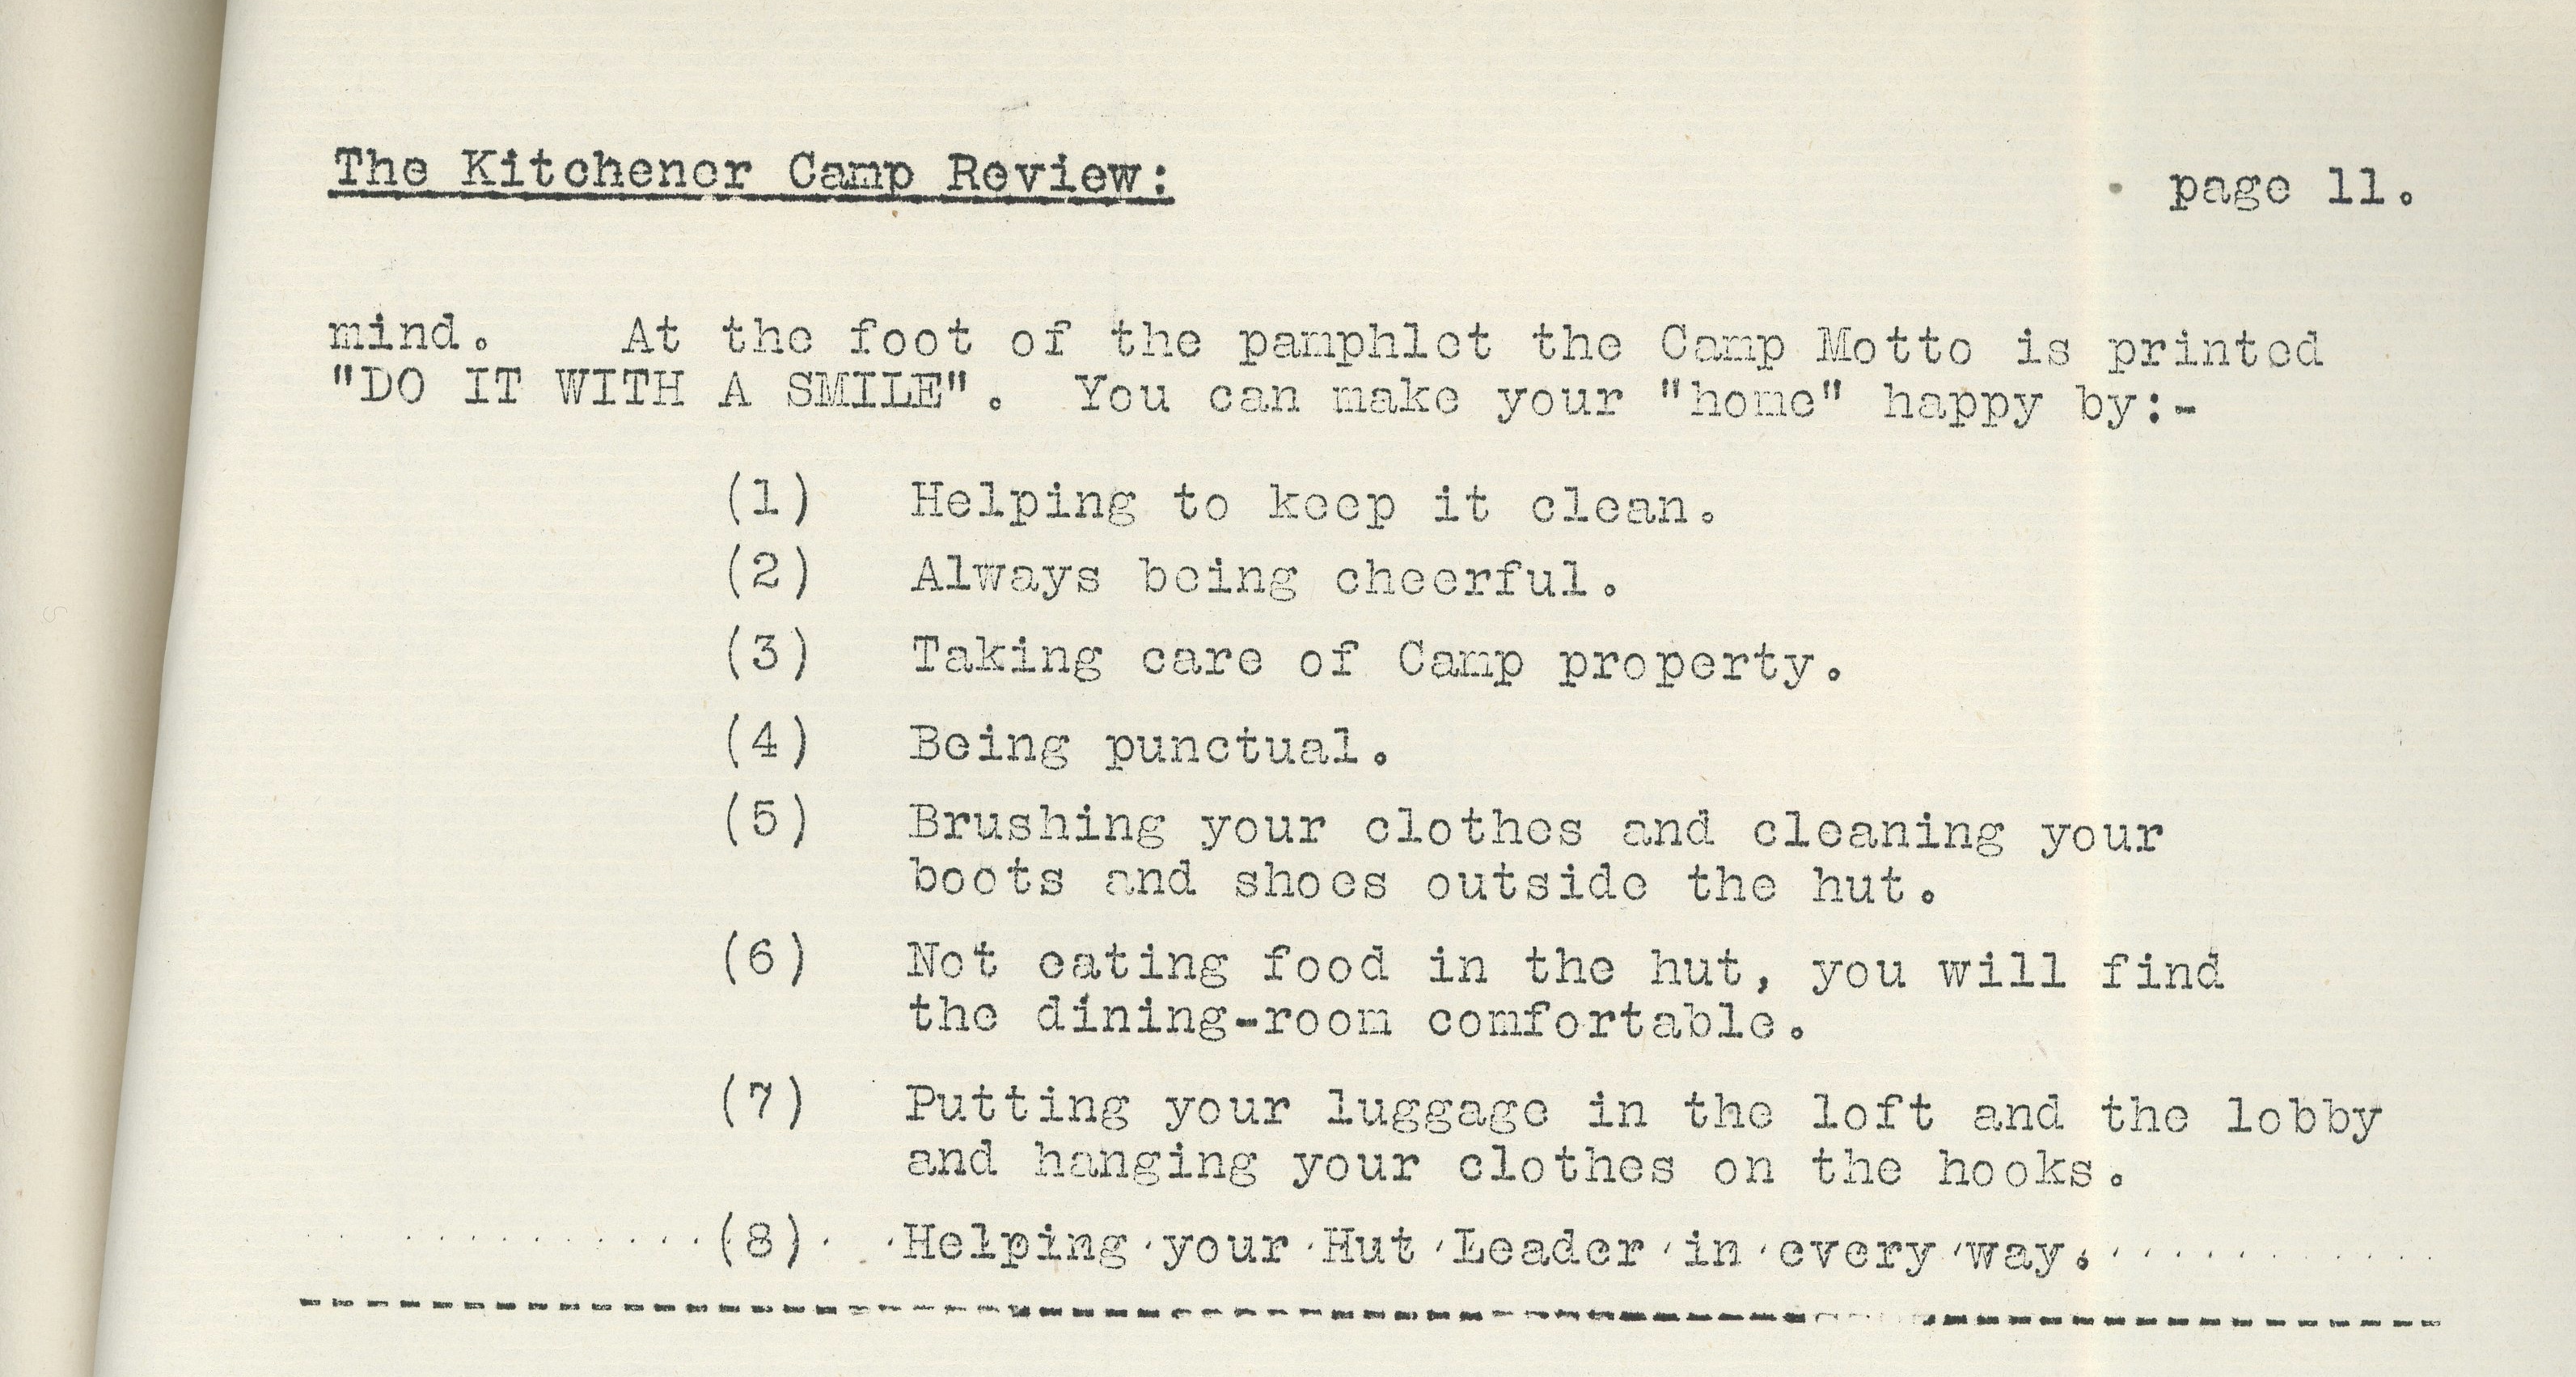 Kitchener Camp Review, April 1939, page 11, top